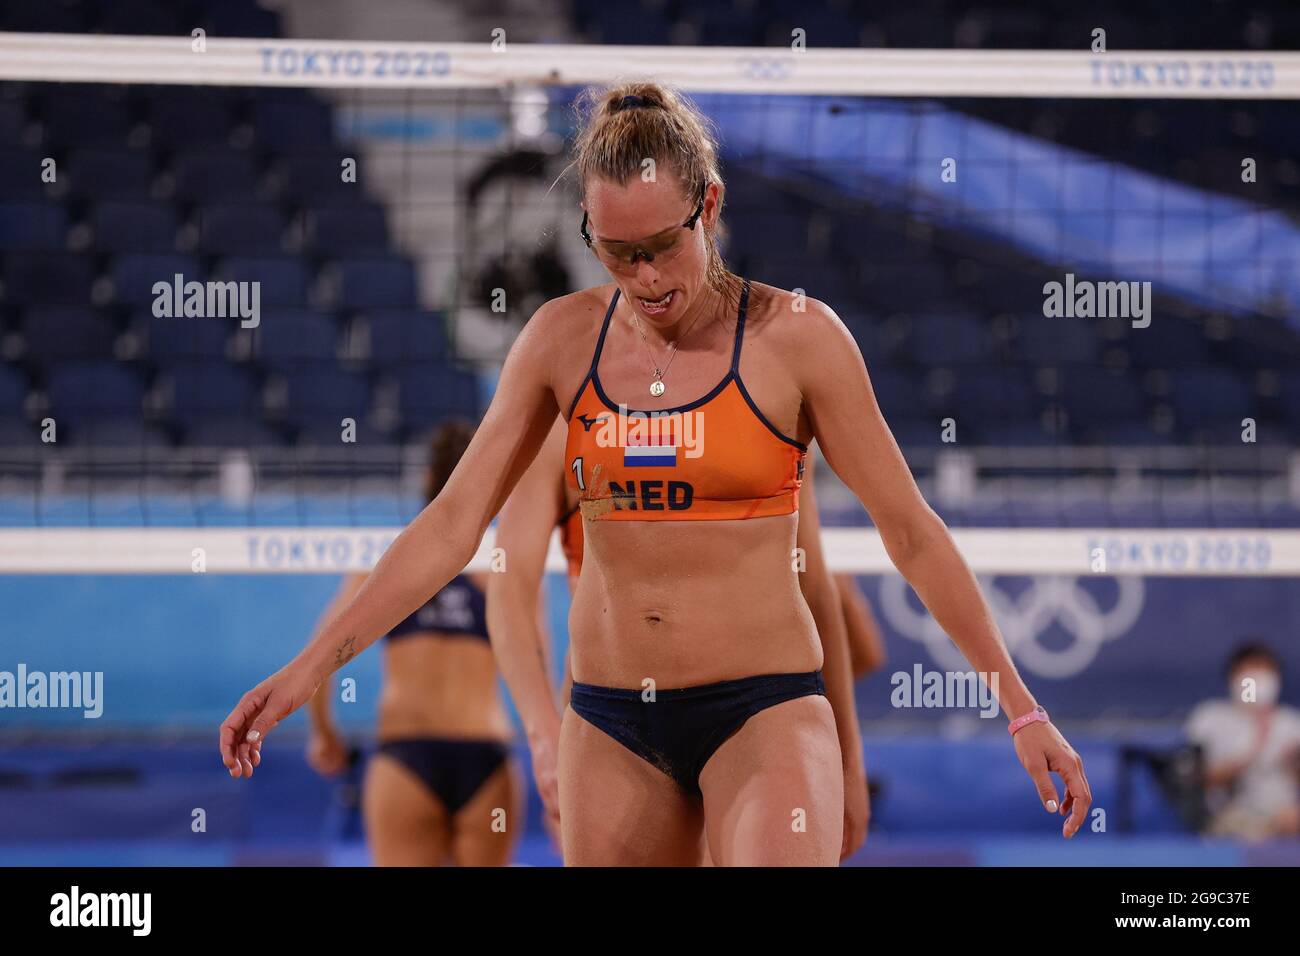 TOKYO, JAPAN - JULY 25: Sanne Keizer of the Netherlands competing on  Women's Preliminary - Pool B during the Tokyo 2020 Olympic Games at the  Shiokaze Park on July 25, 2021 in